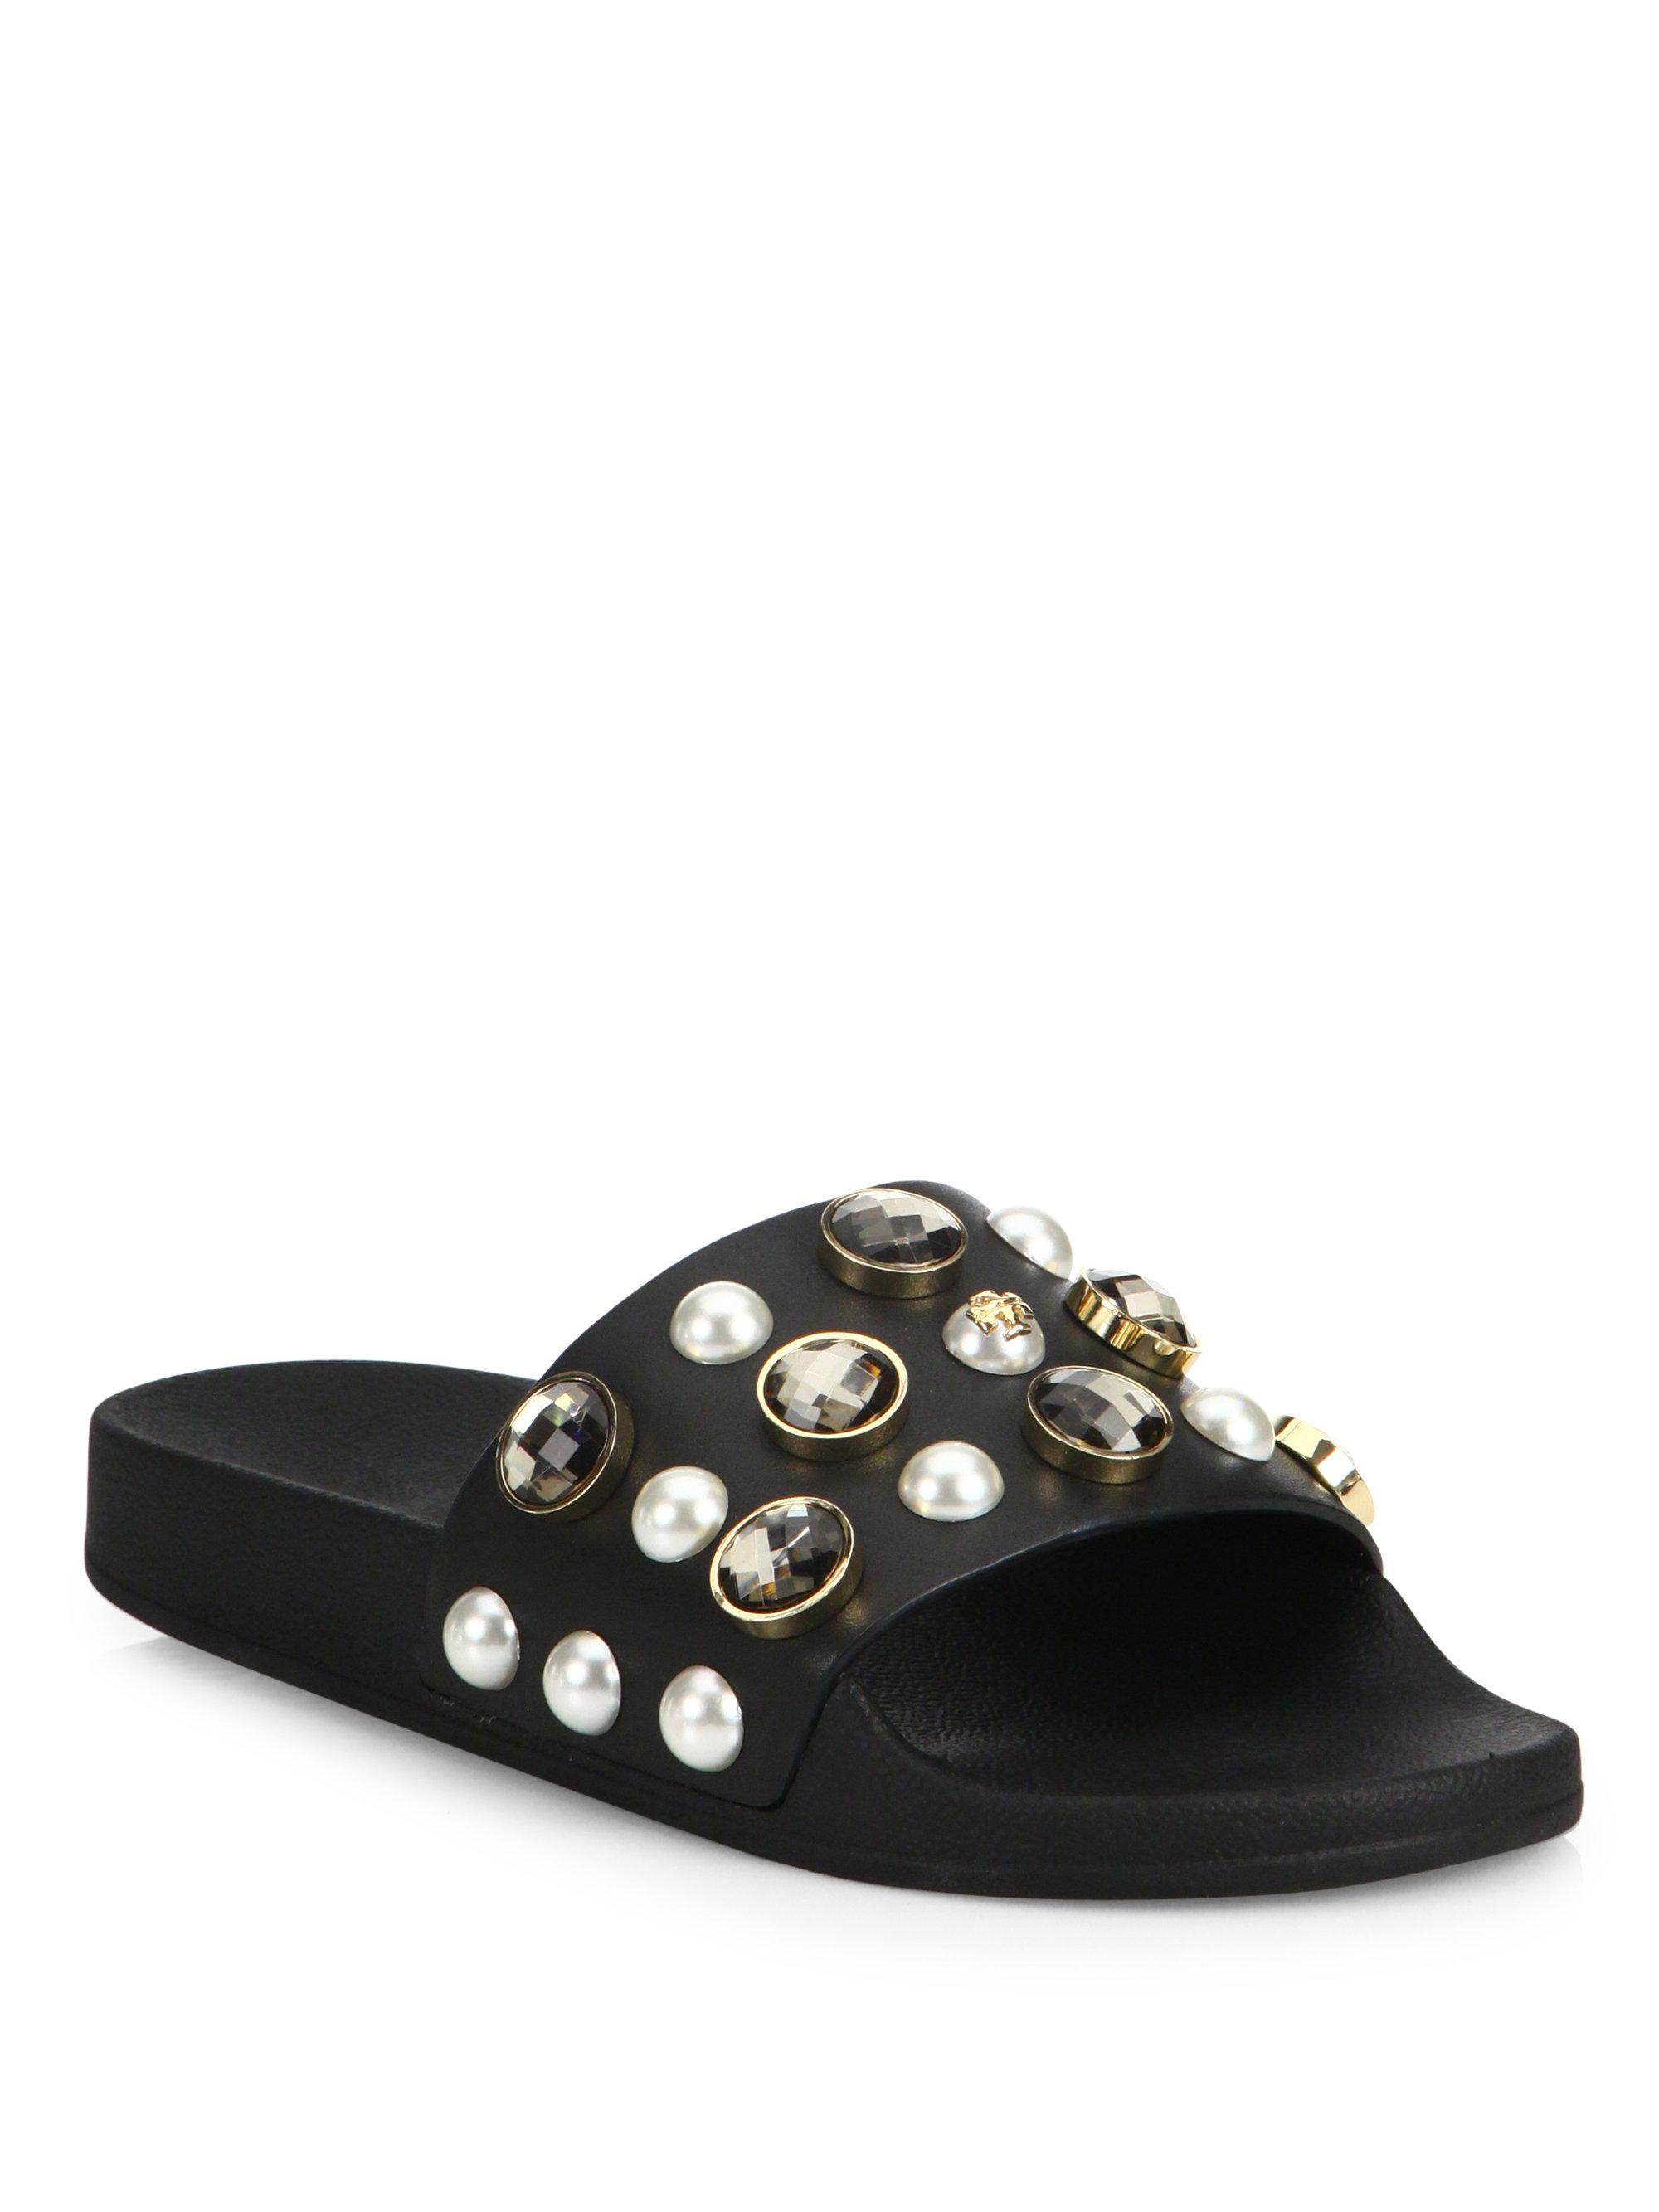 Lyst - Tory Burch Vail Jeweled Leather Slides in Black